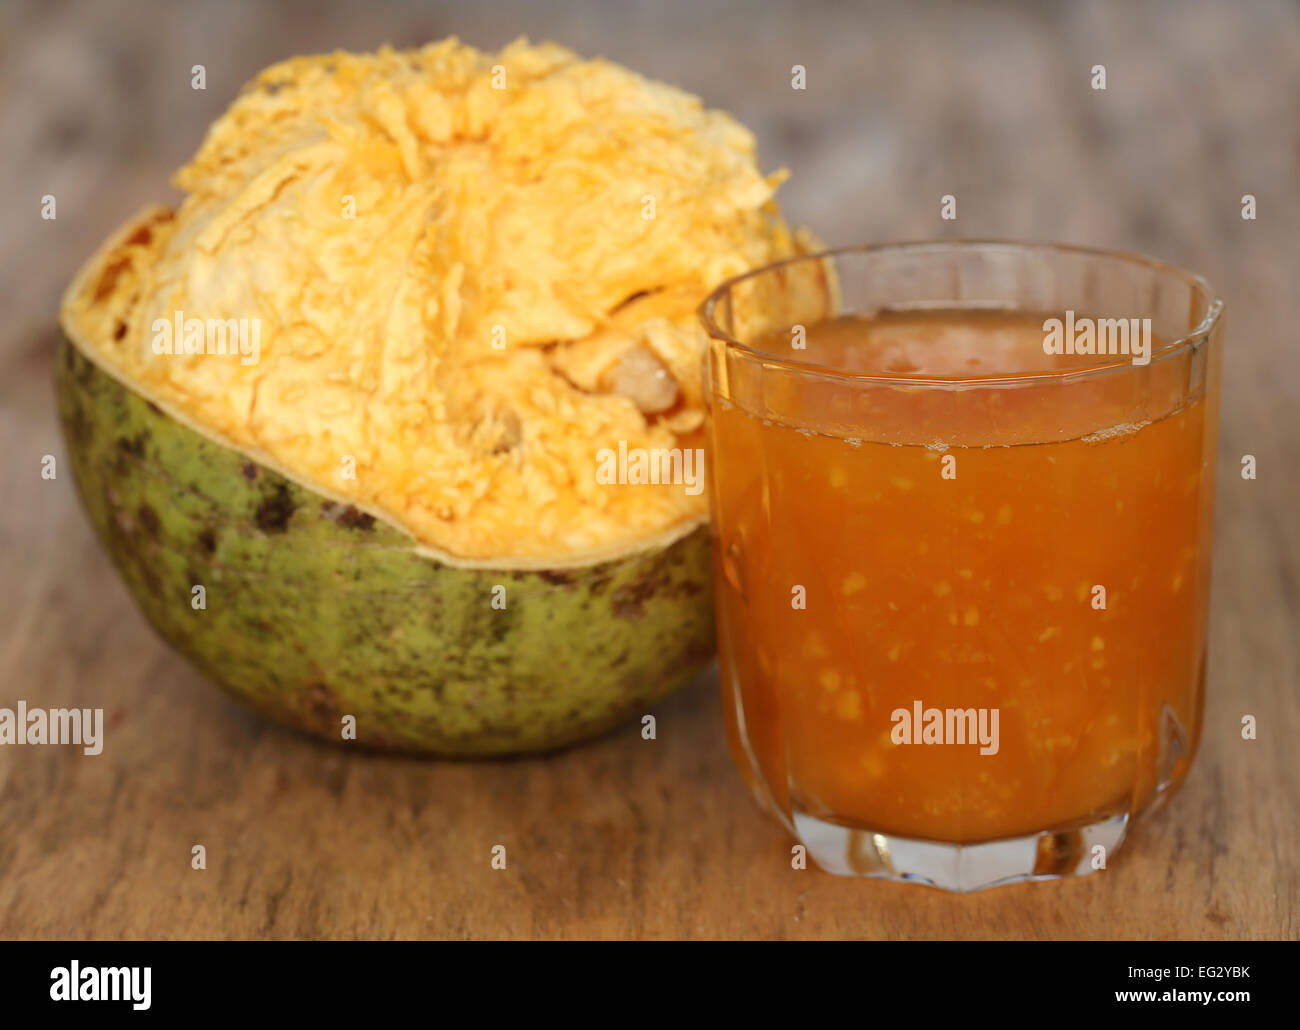 Medicinal Bael fruit with juice on wooden surface Stock Photo